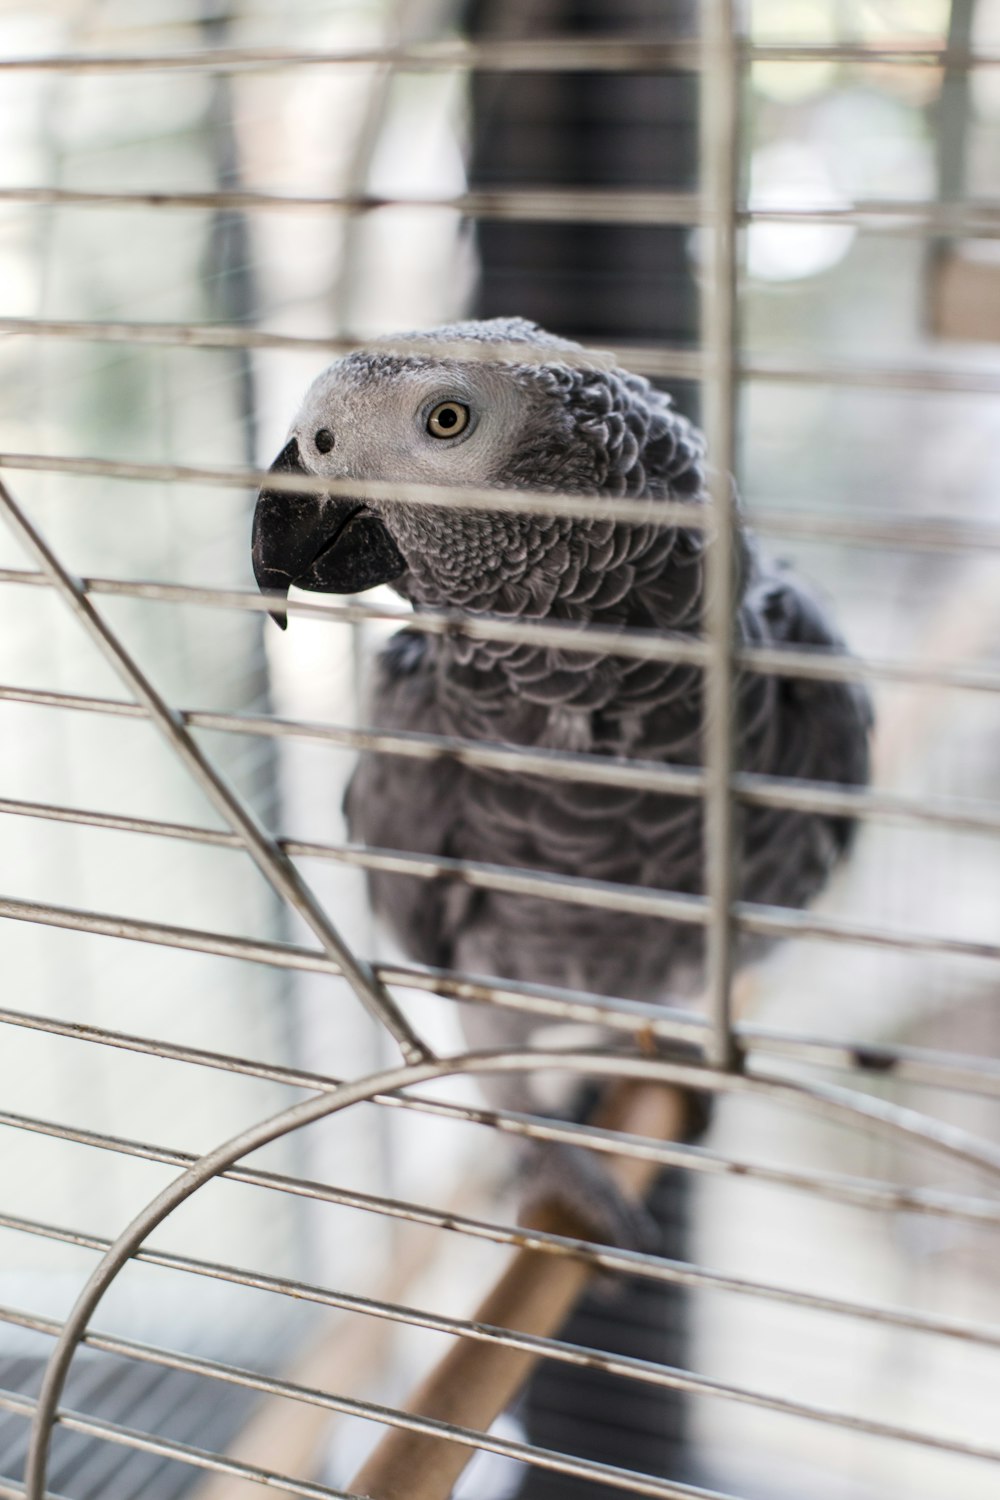 a gray parrot sitting inside of a metal cage